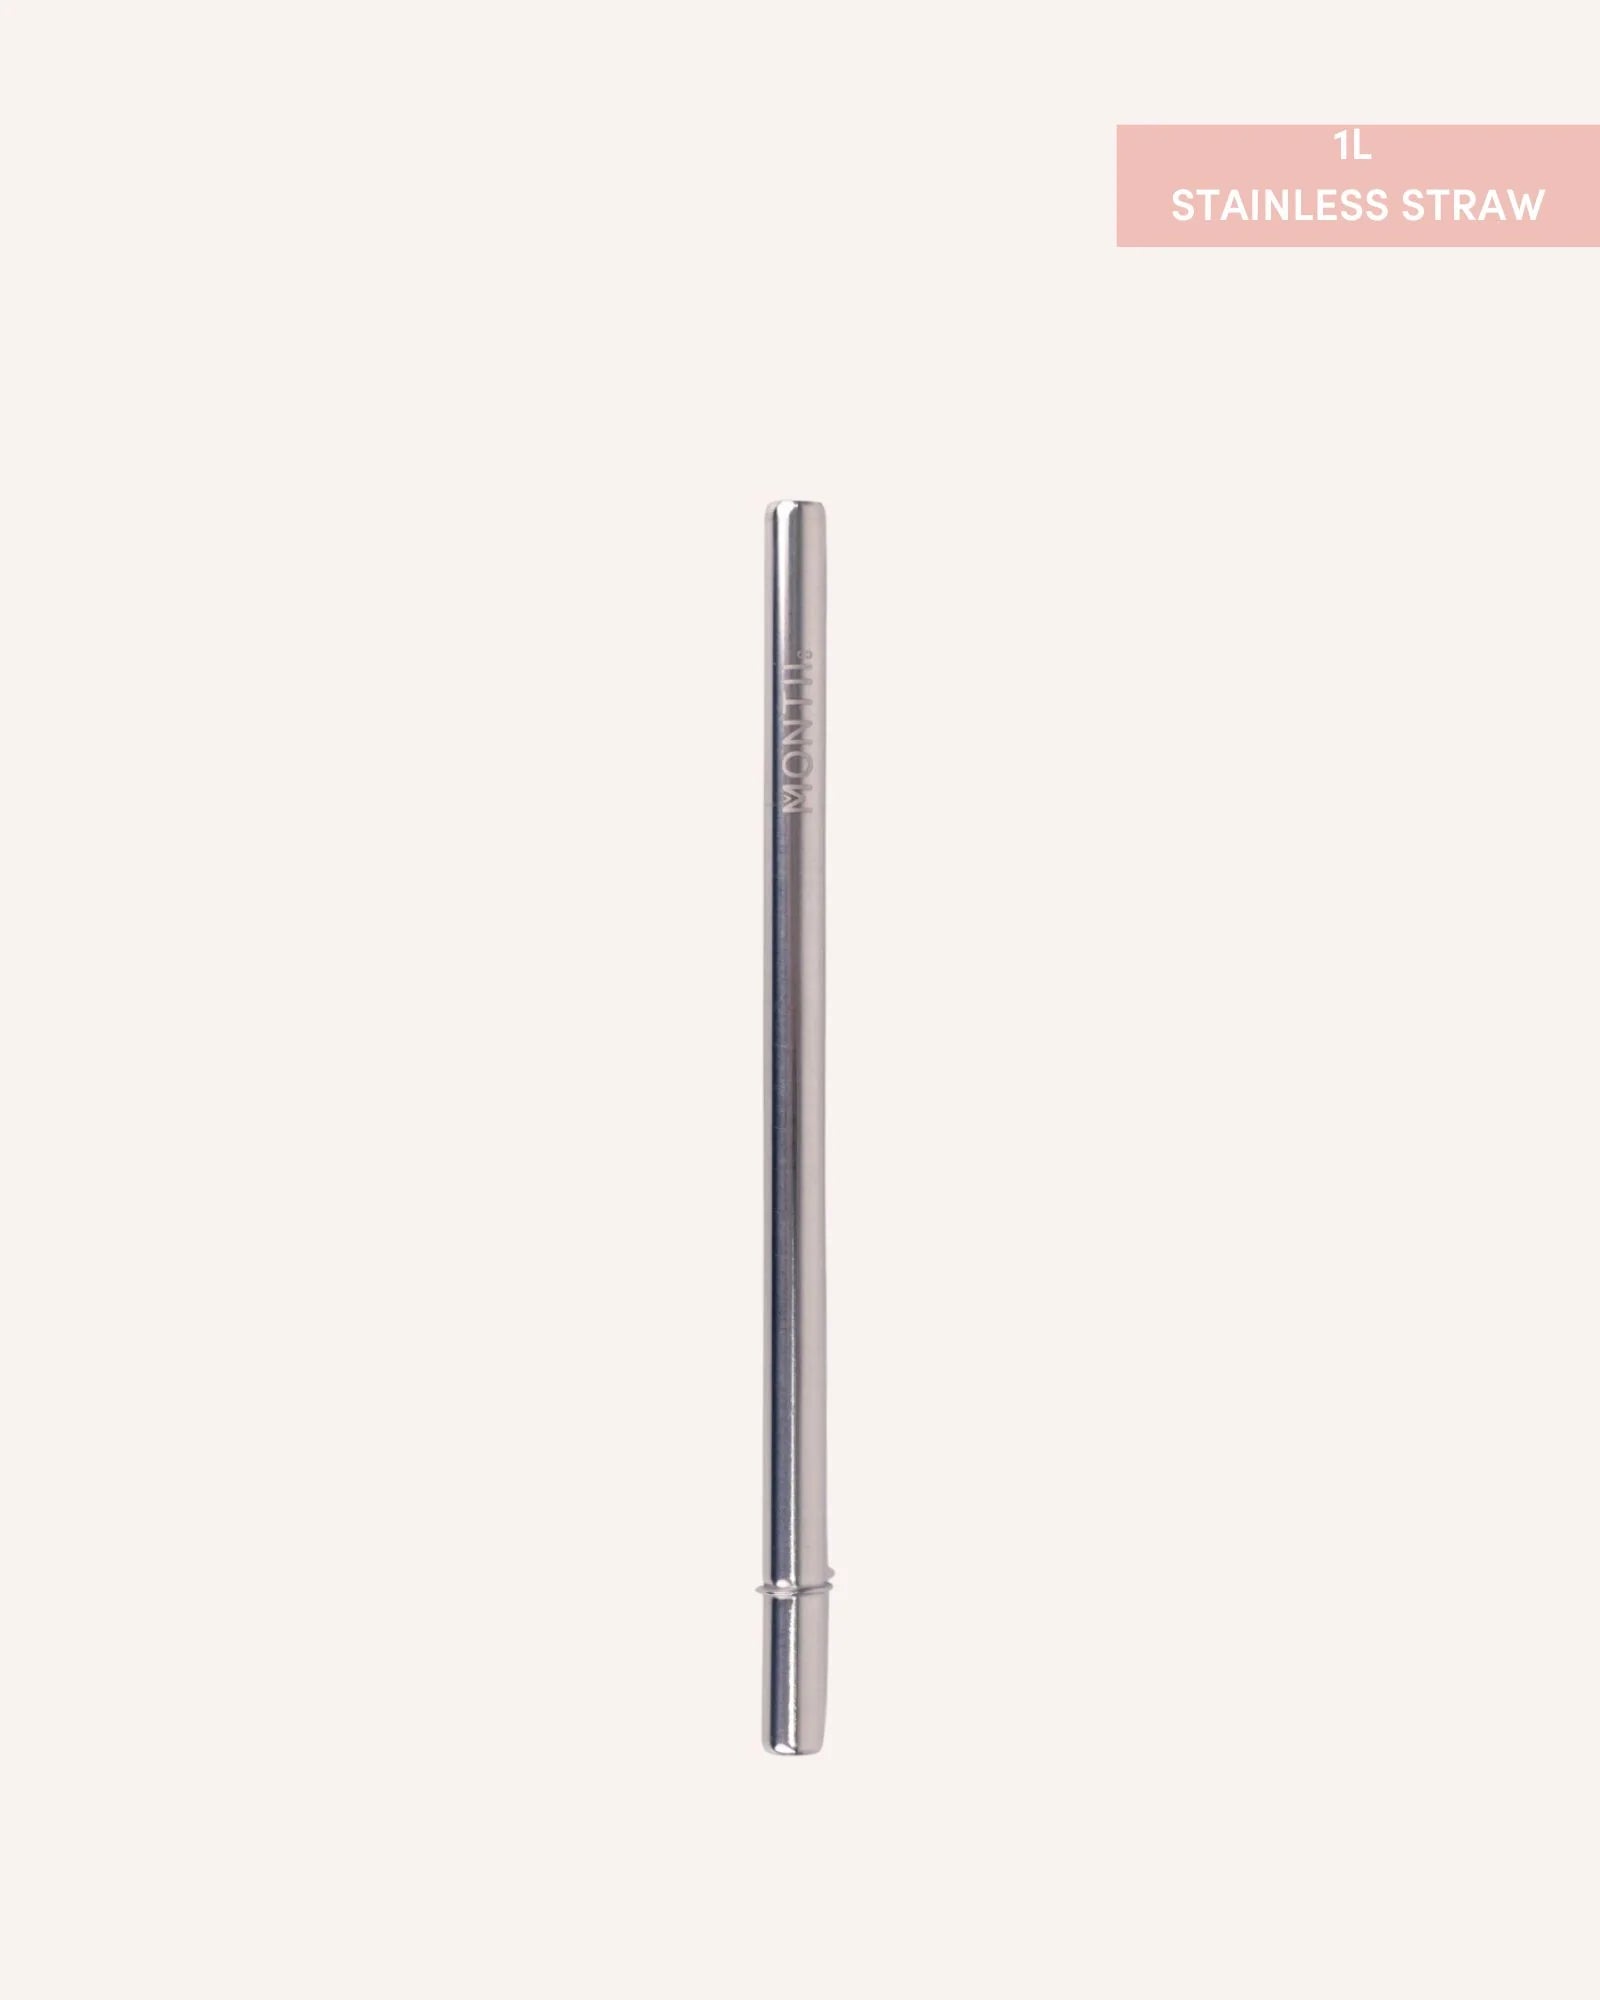 FUSION Stainless Smoothie Straw